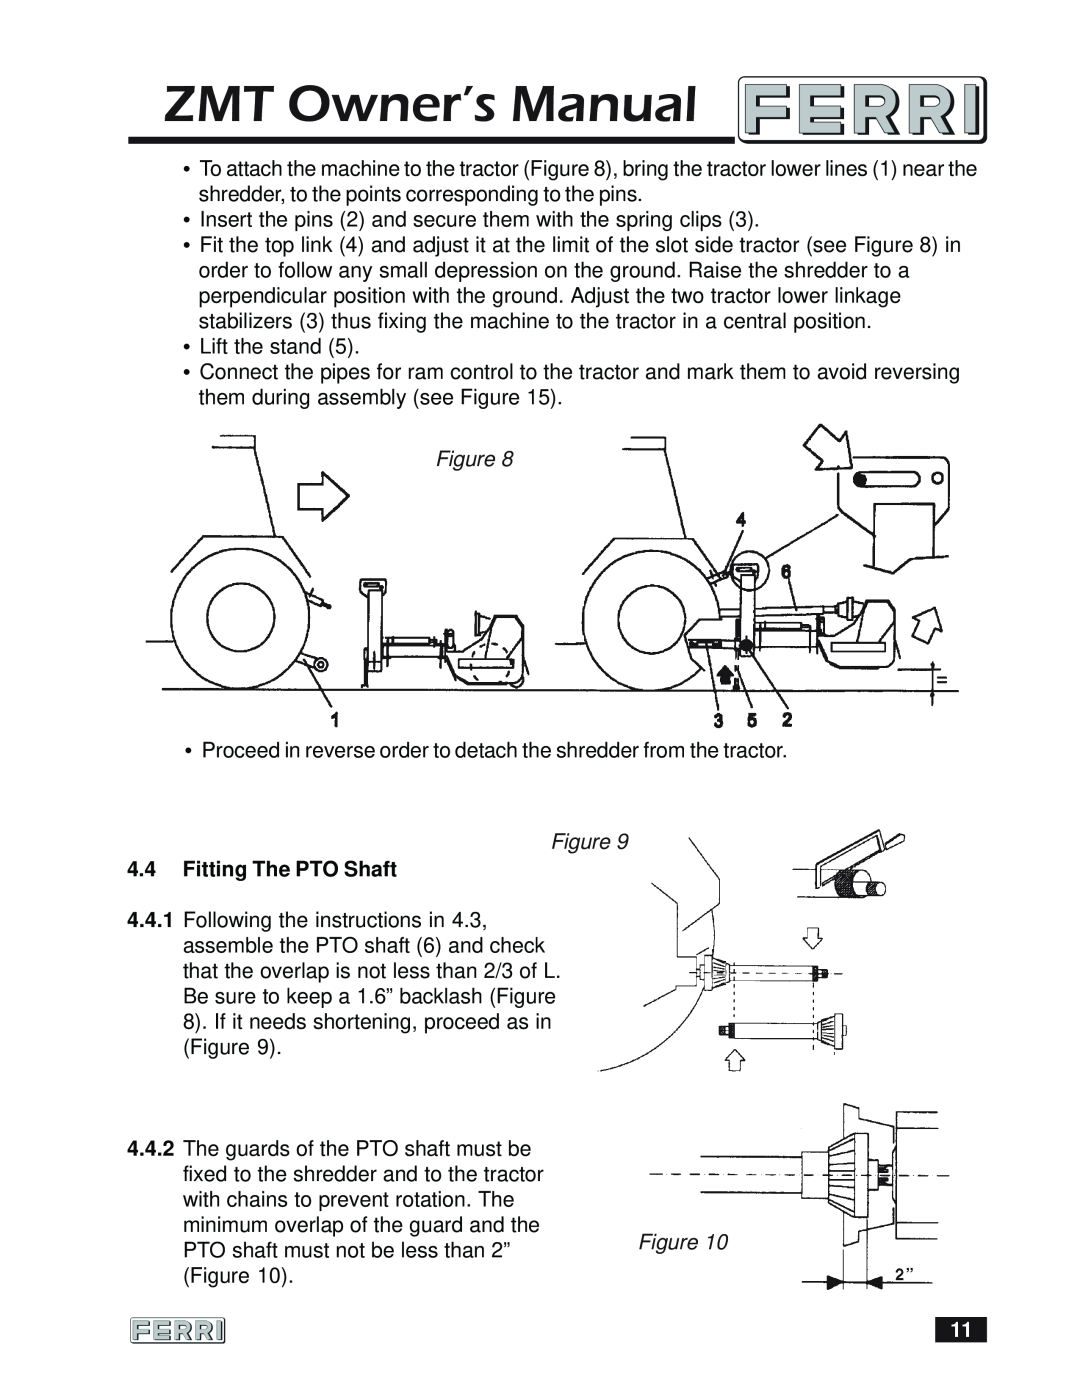 Ferris Industries 160 owner manual 4.4Fitting The PTO Shaft, Figure 